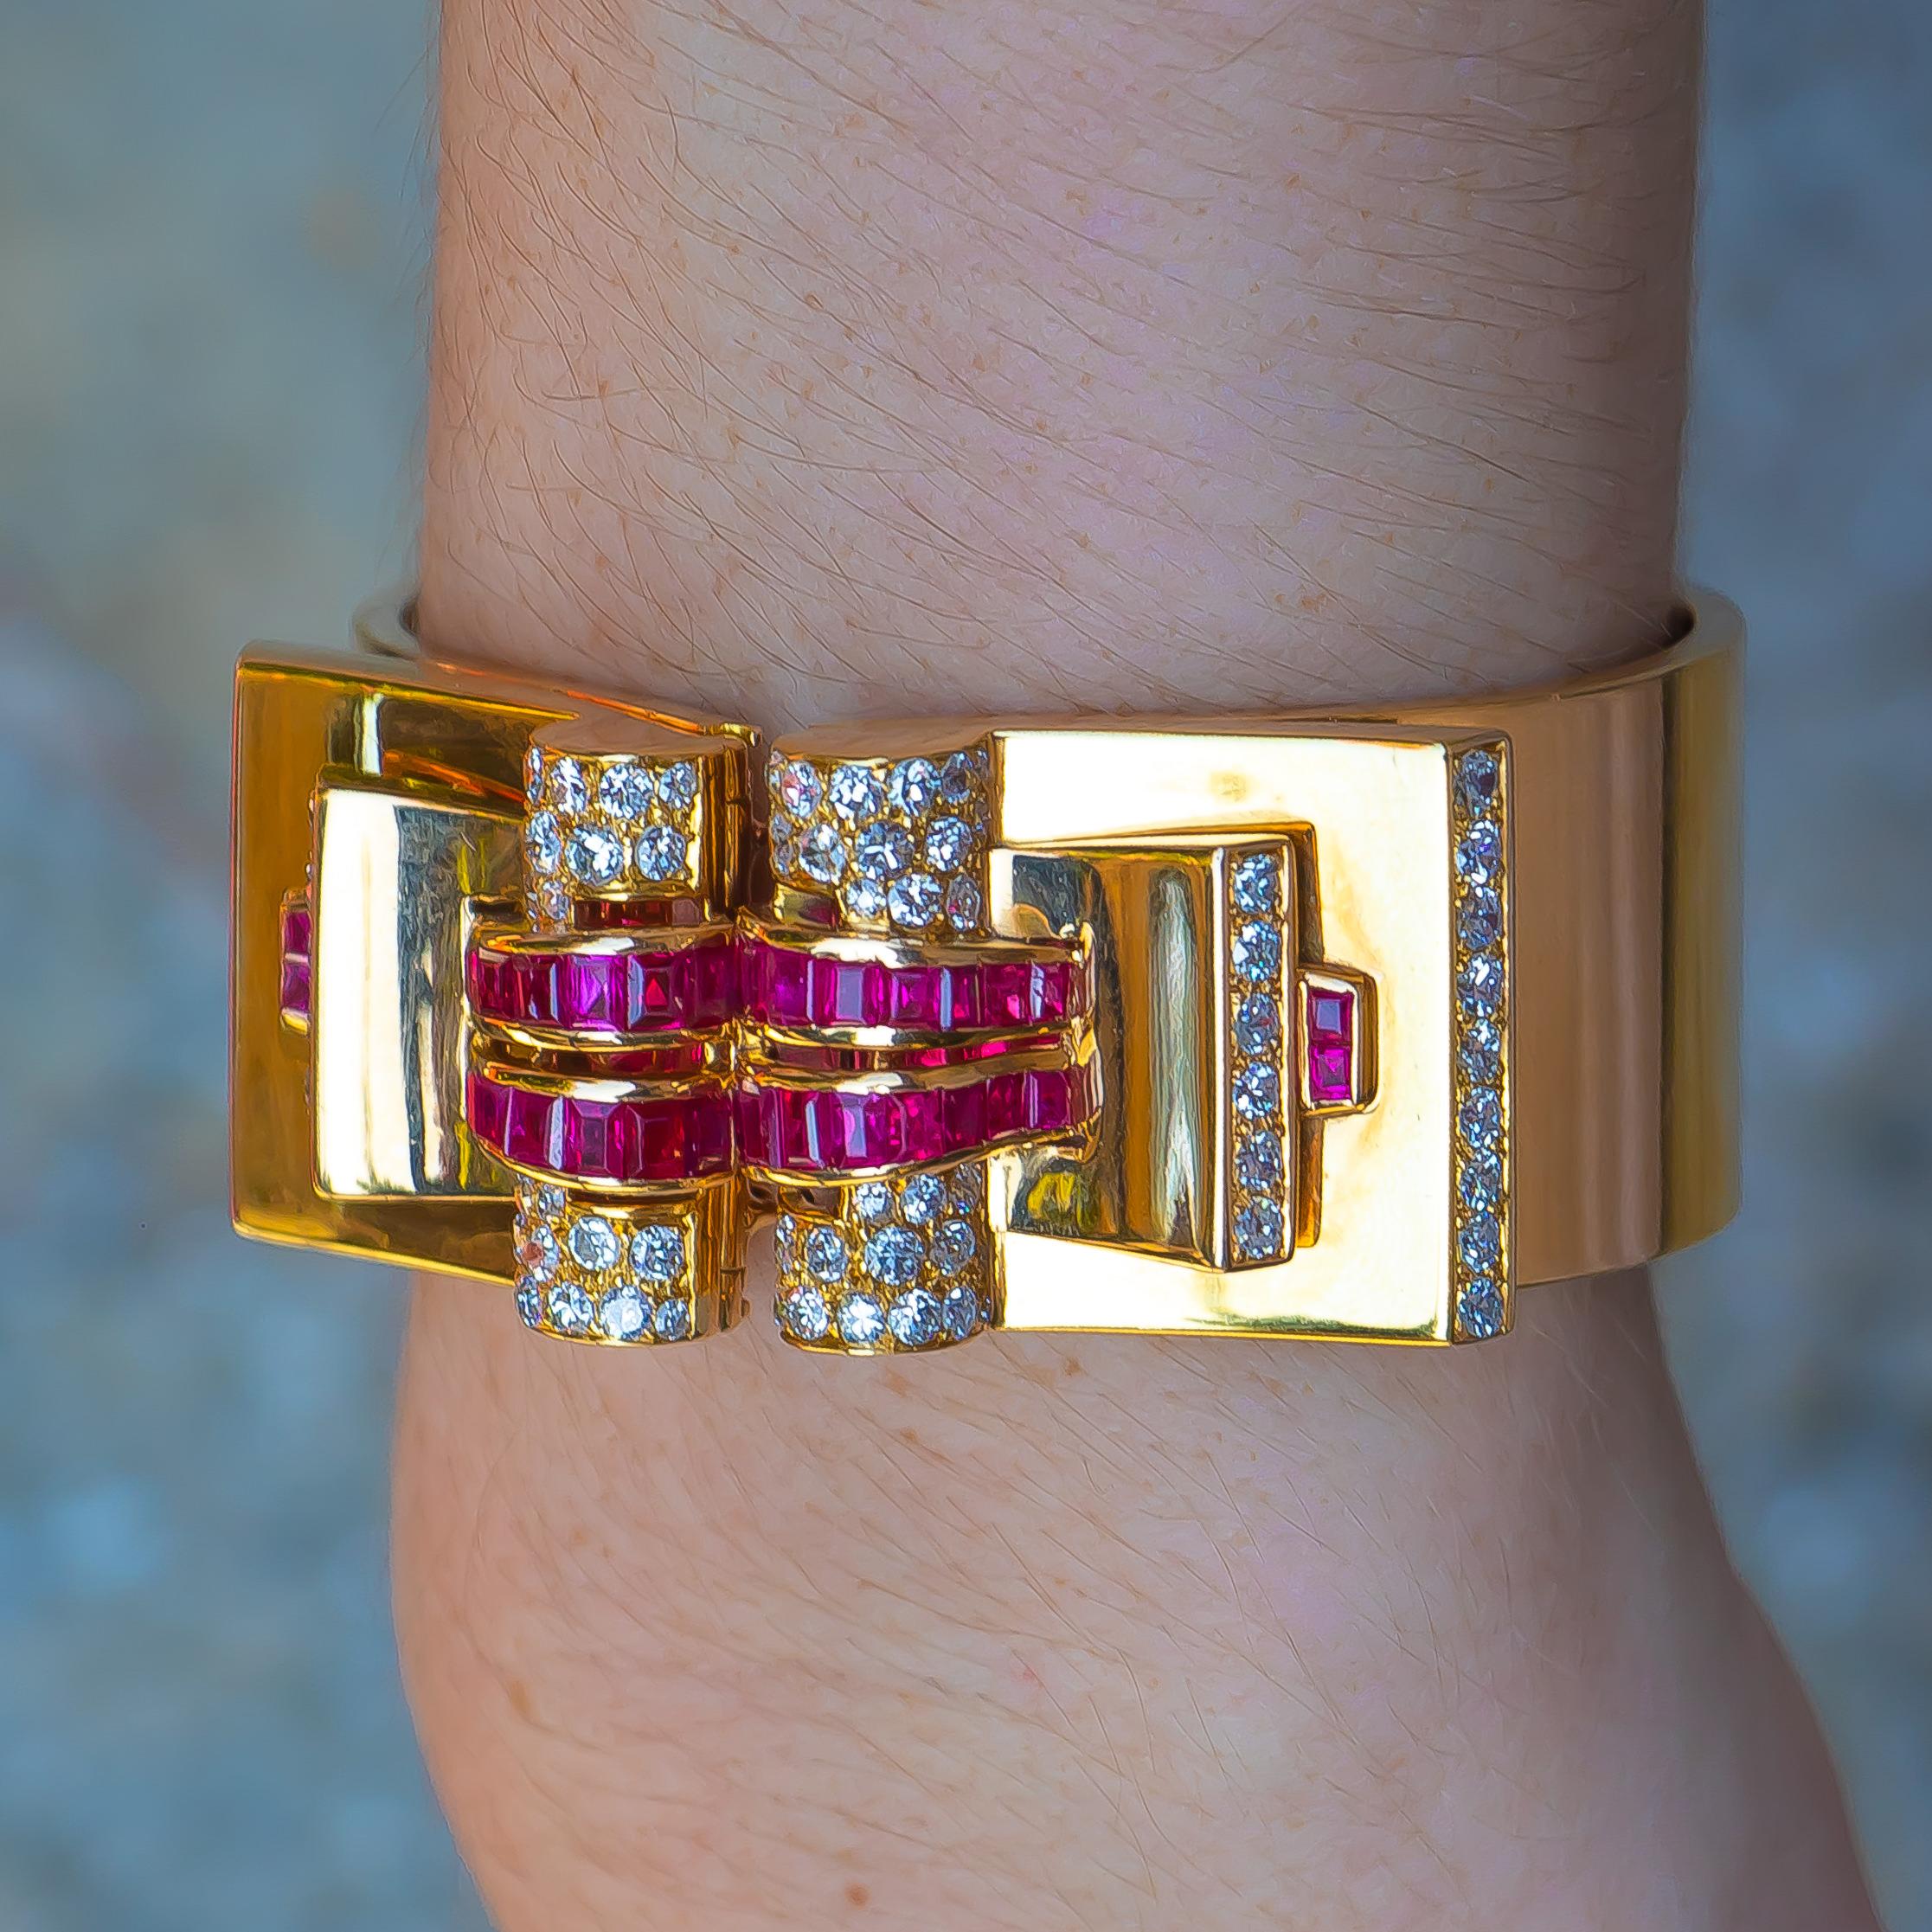 Very Fine Rubies = 3.80 carats
Diamonds = 30 carats
( Color: F, Clarity: VS )
Metal: 18K Yellow Gold
End pieces can be removed and worn as brooches.